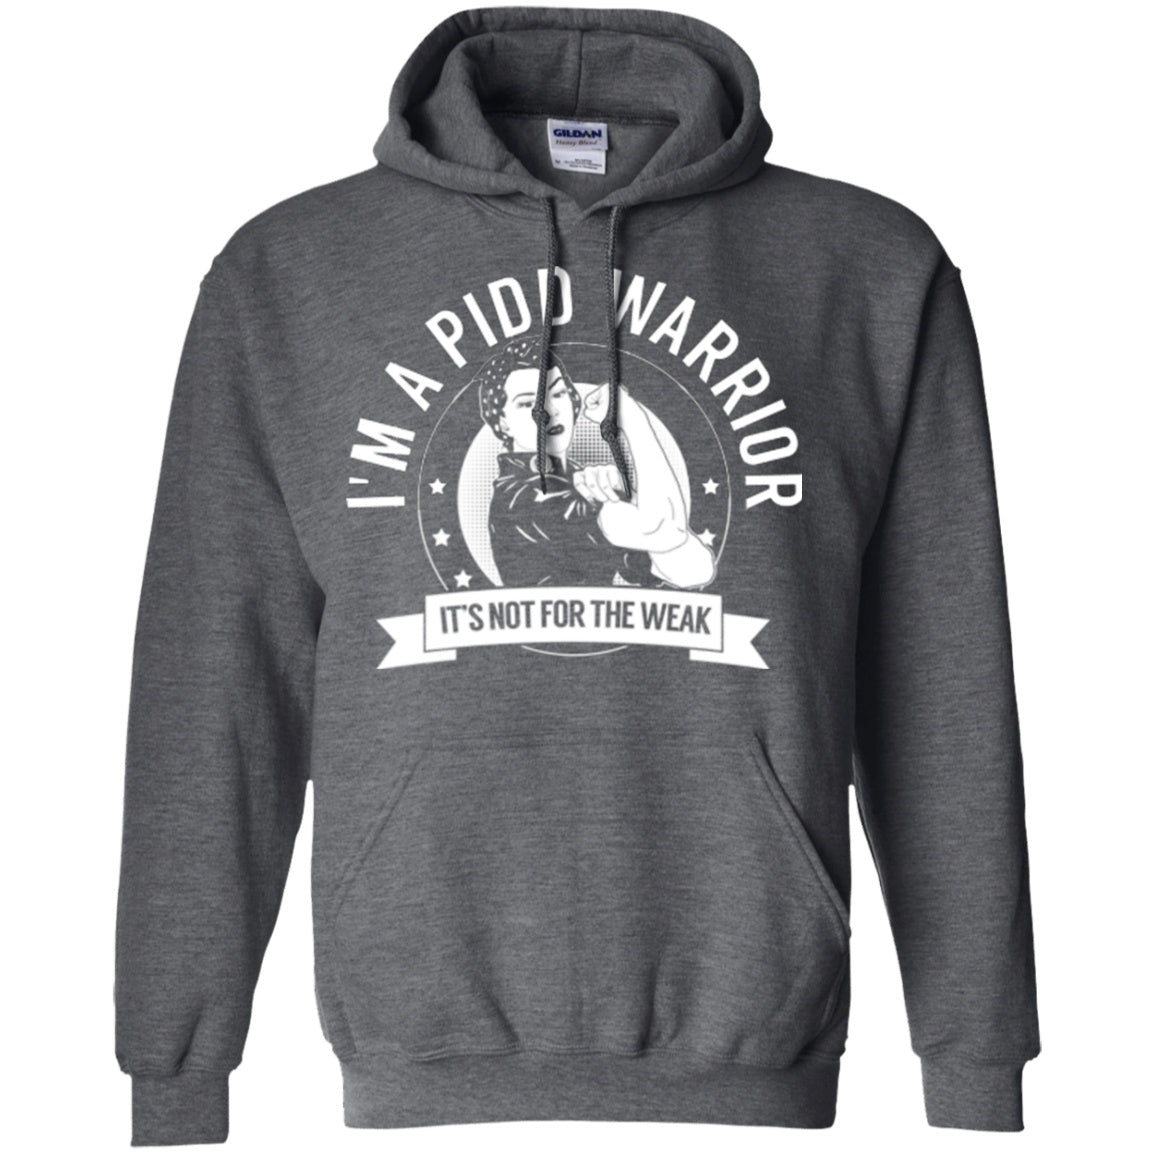 Primary Immunodeficiency Diseases - PIDD Warrior Not For The Weak Pullover Hoodie 8 oz. - The Unchargeables